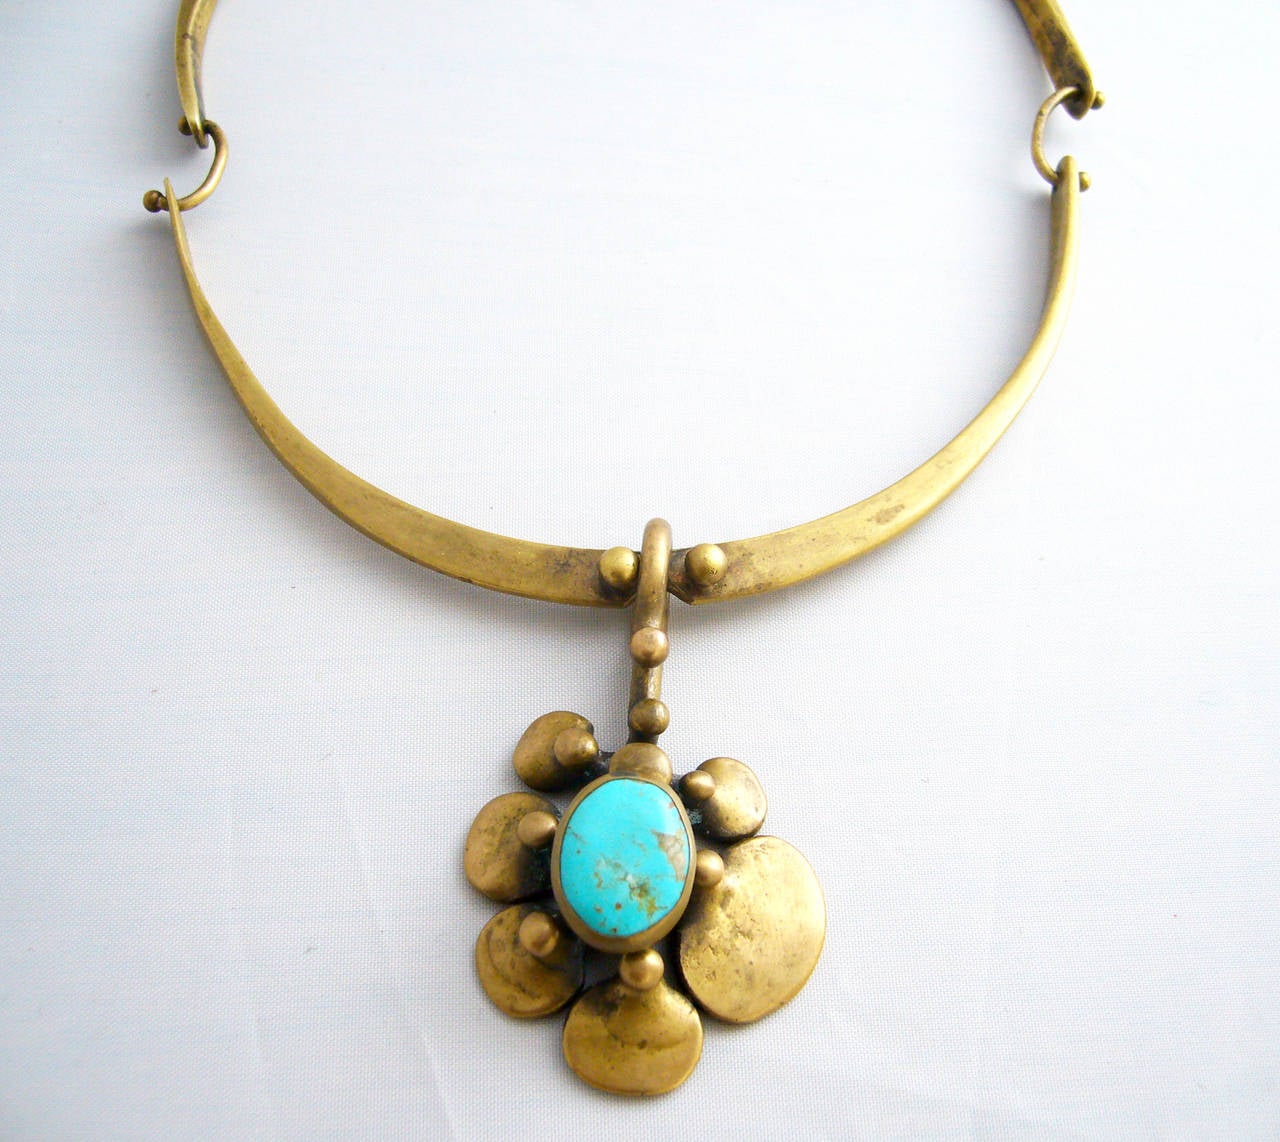 A bronze and turquoise necklace created by the Jack Boyd Studio of San Diego, circa 1960's.  Necklace has a wearable neck length of about 16